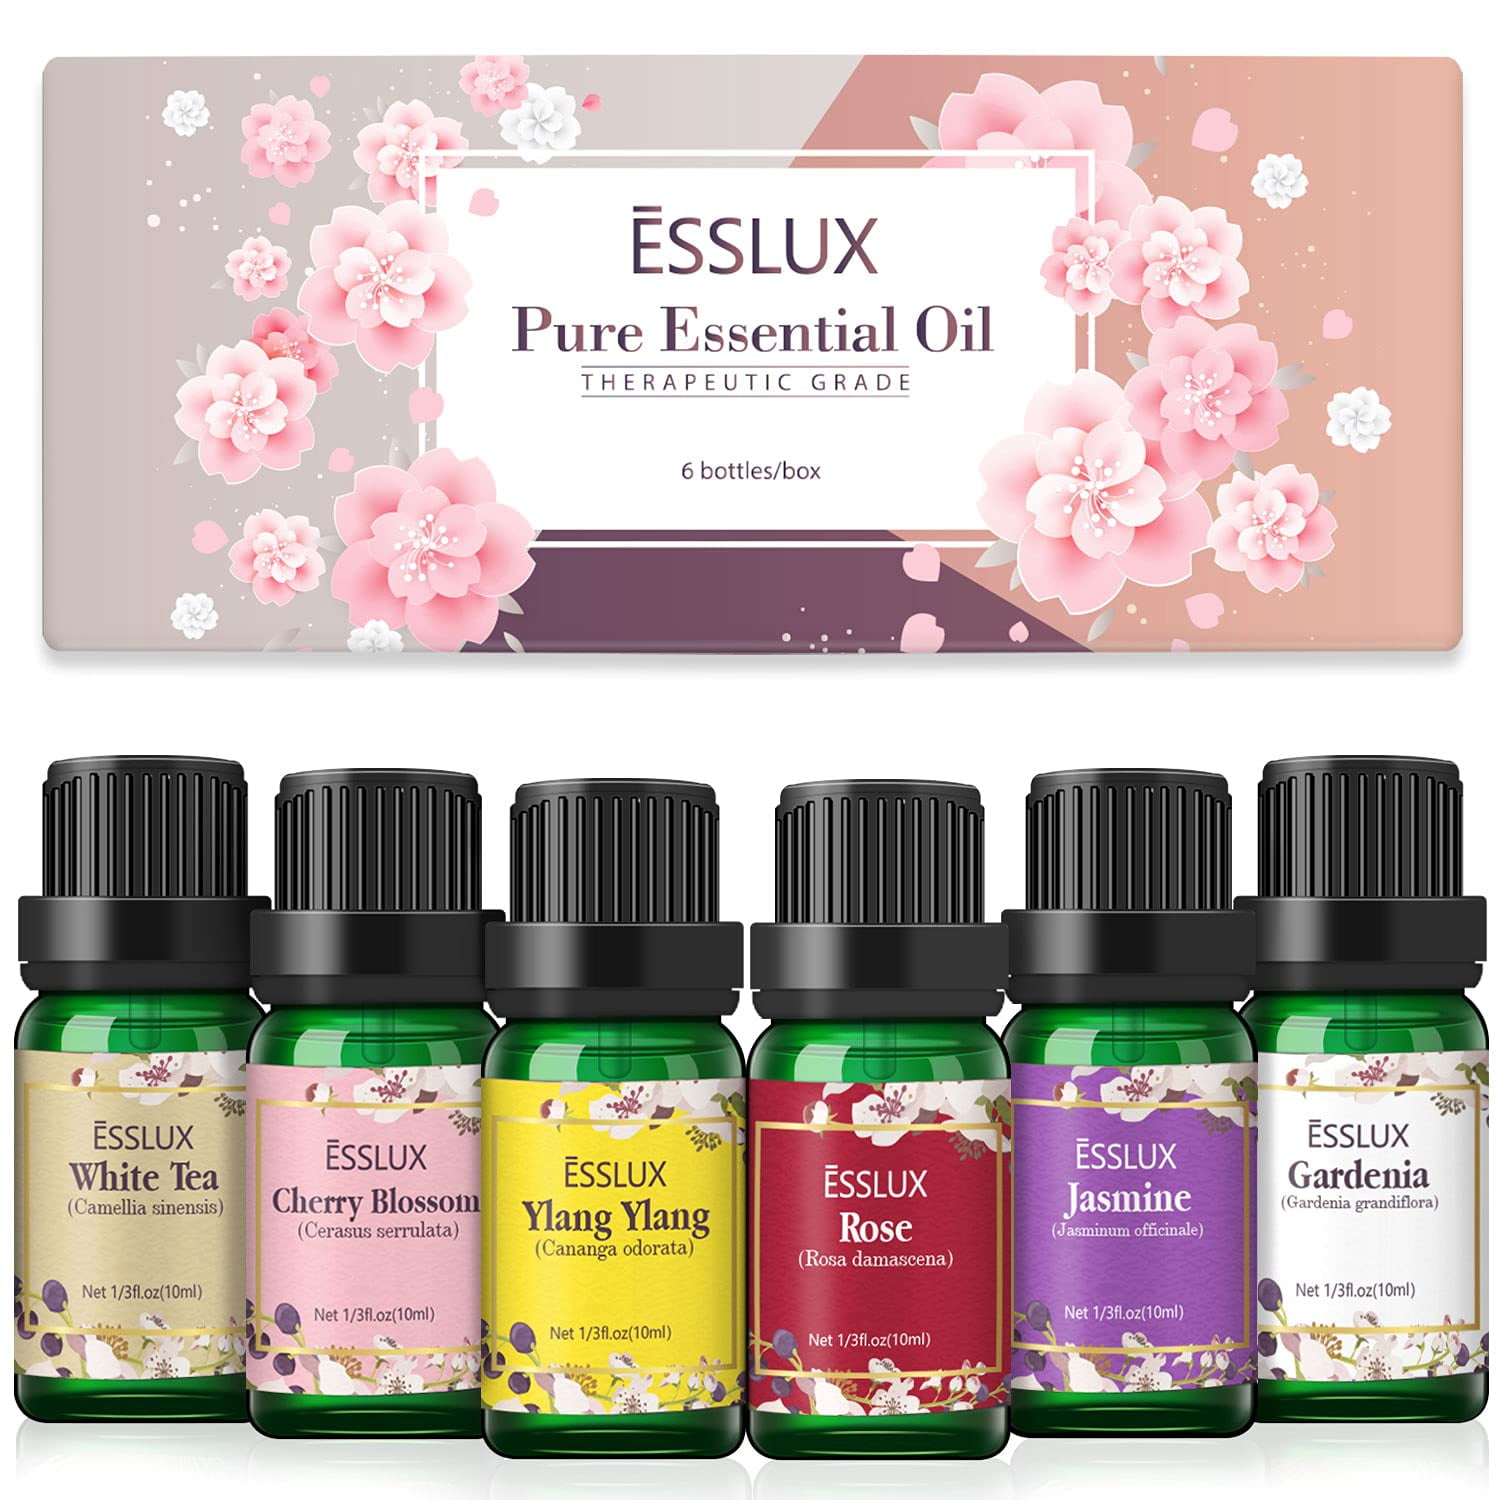 Floral Fragrance Oil Collection - Premium Grade Gift Set Oils for Diffuser,  DIY Candle Making, Soap Scents, Slime, Home, Aromatherapy - Jasmine,  Vanilla, Parma Violet, Freesia, Lily, Rosemary (10ml) 6-Pack